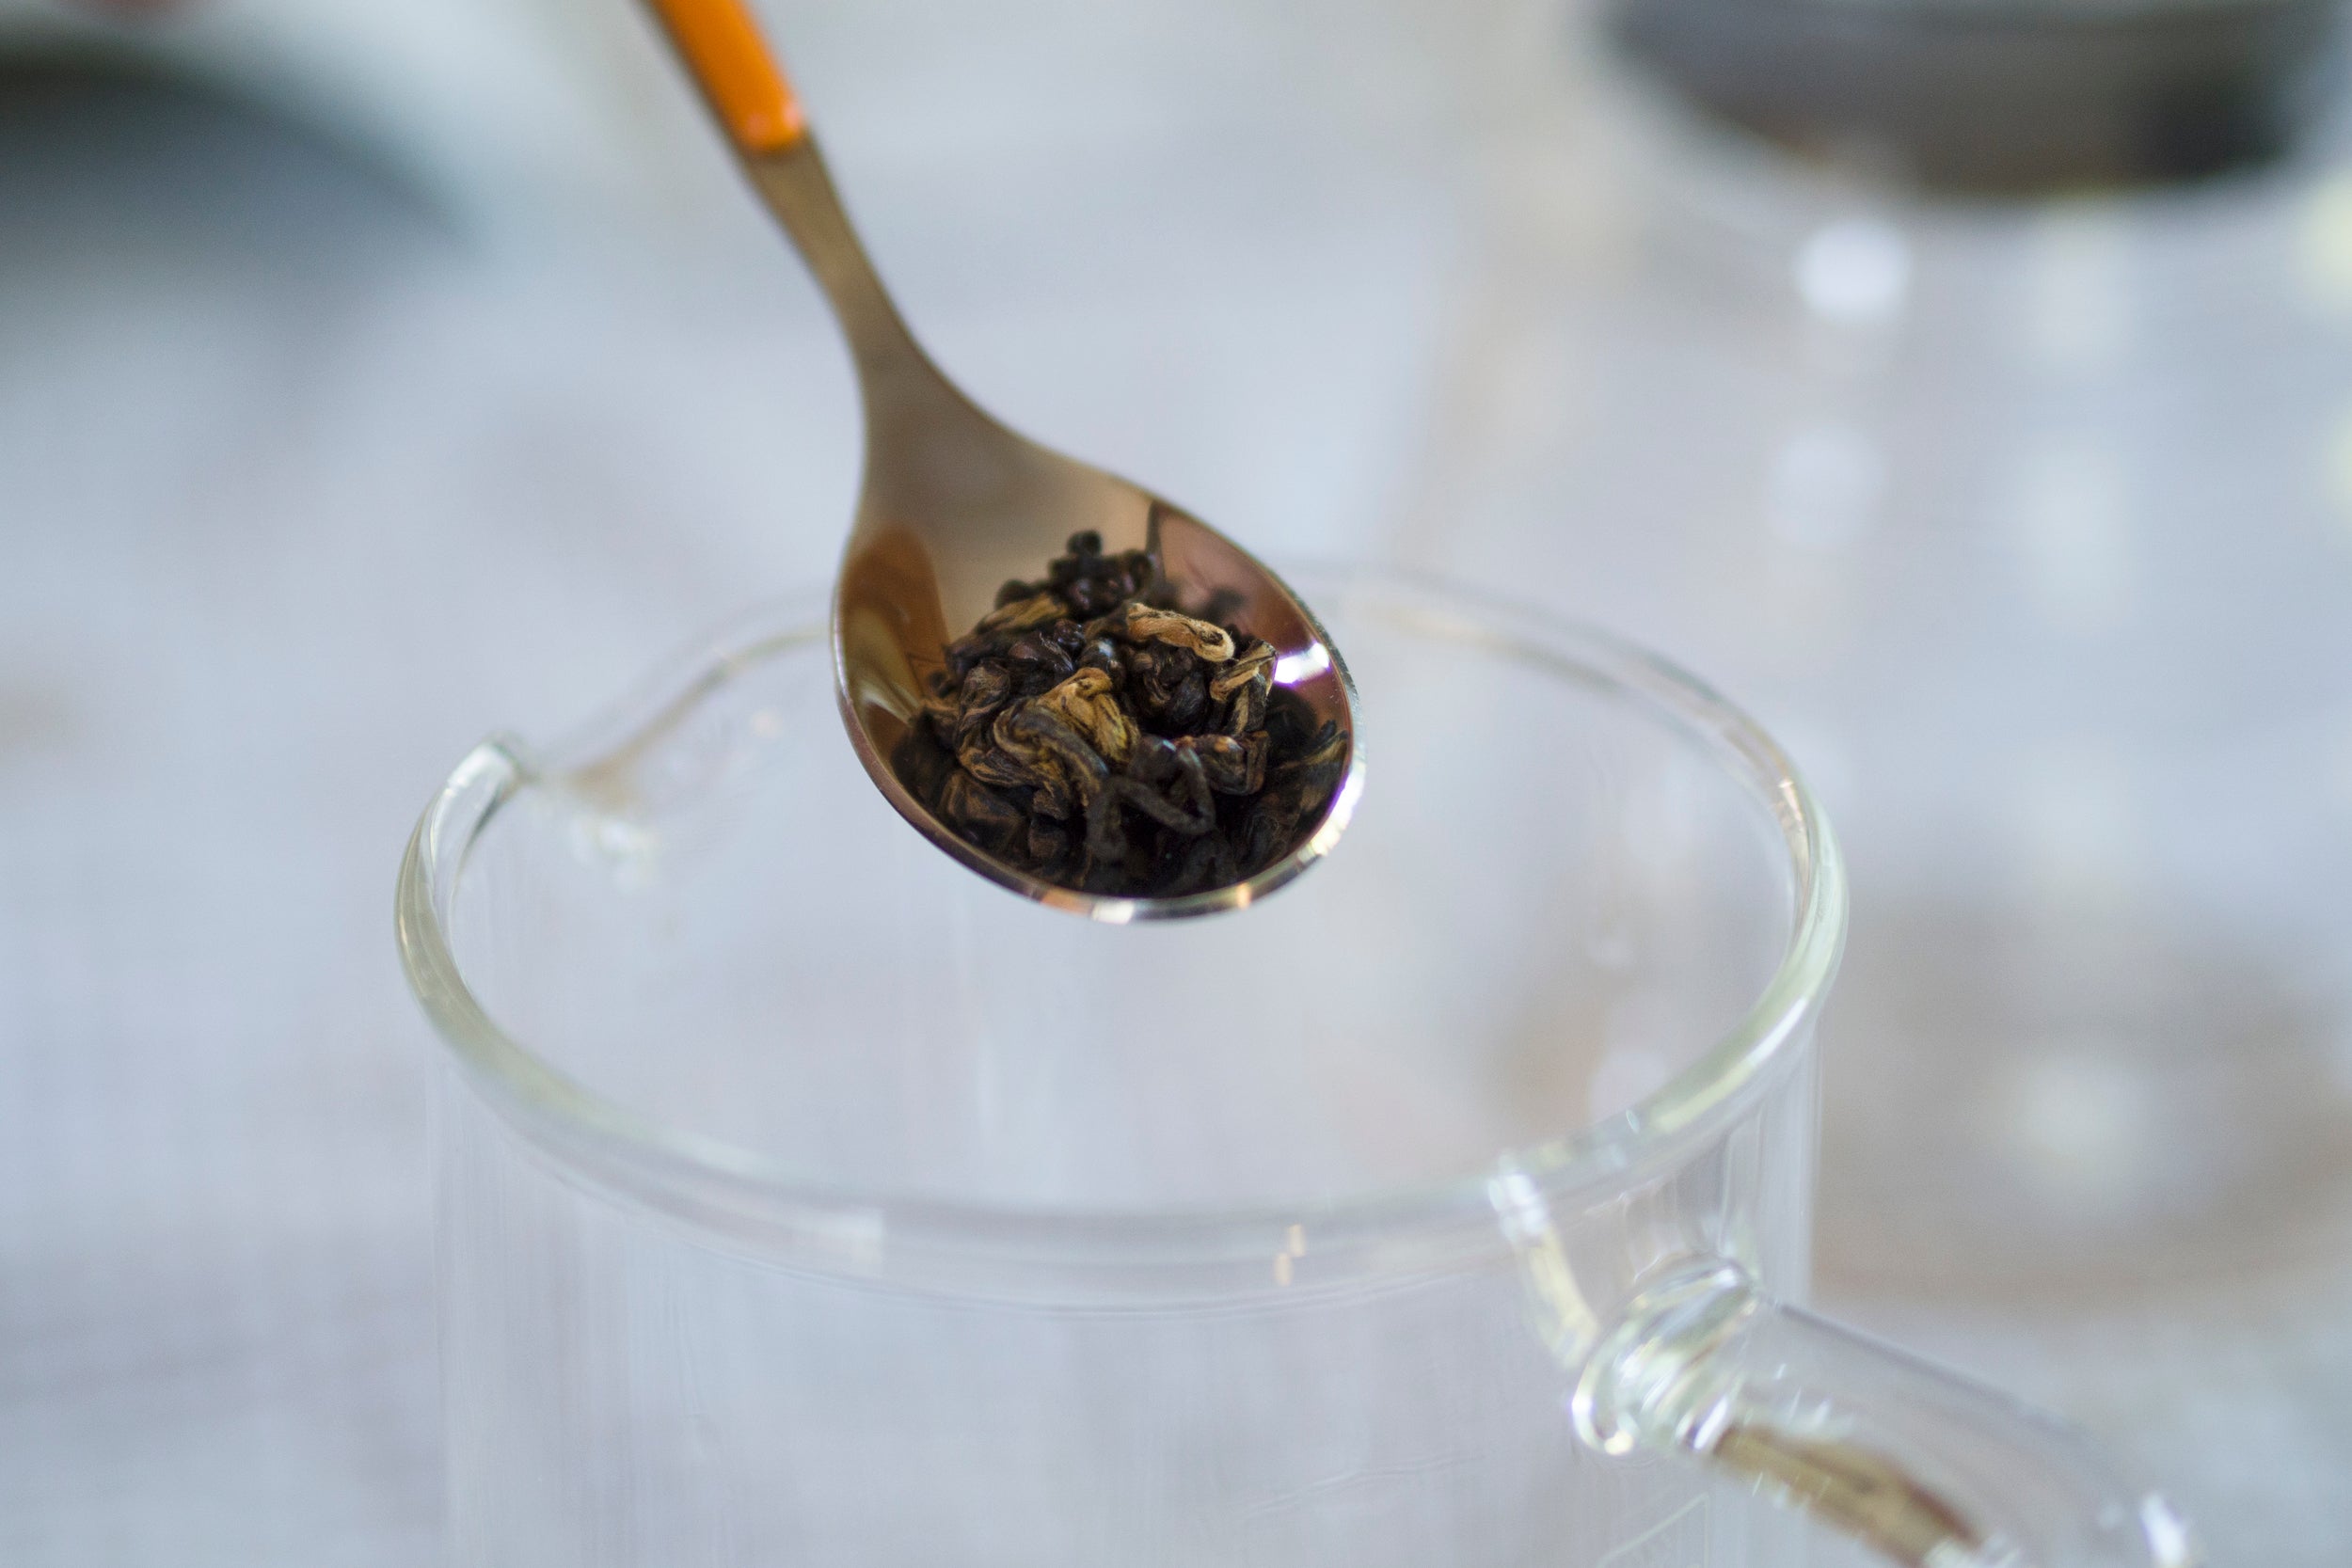 Spoon with tea leaves